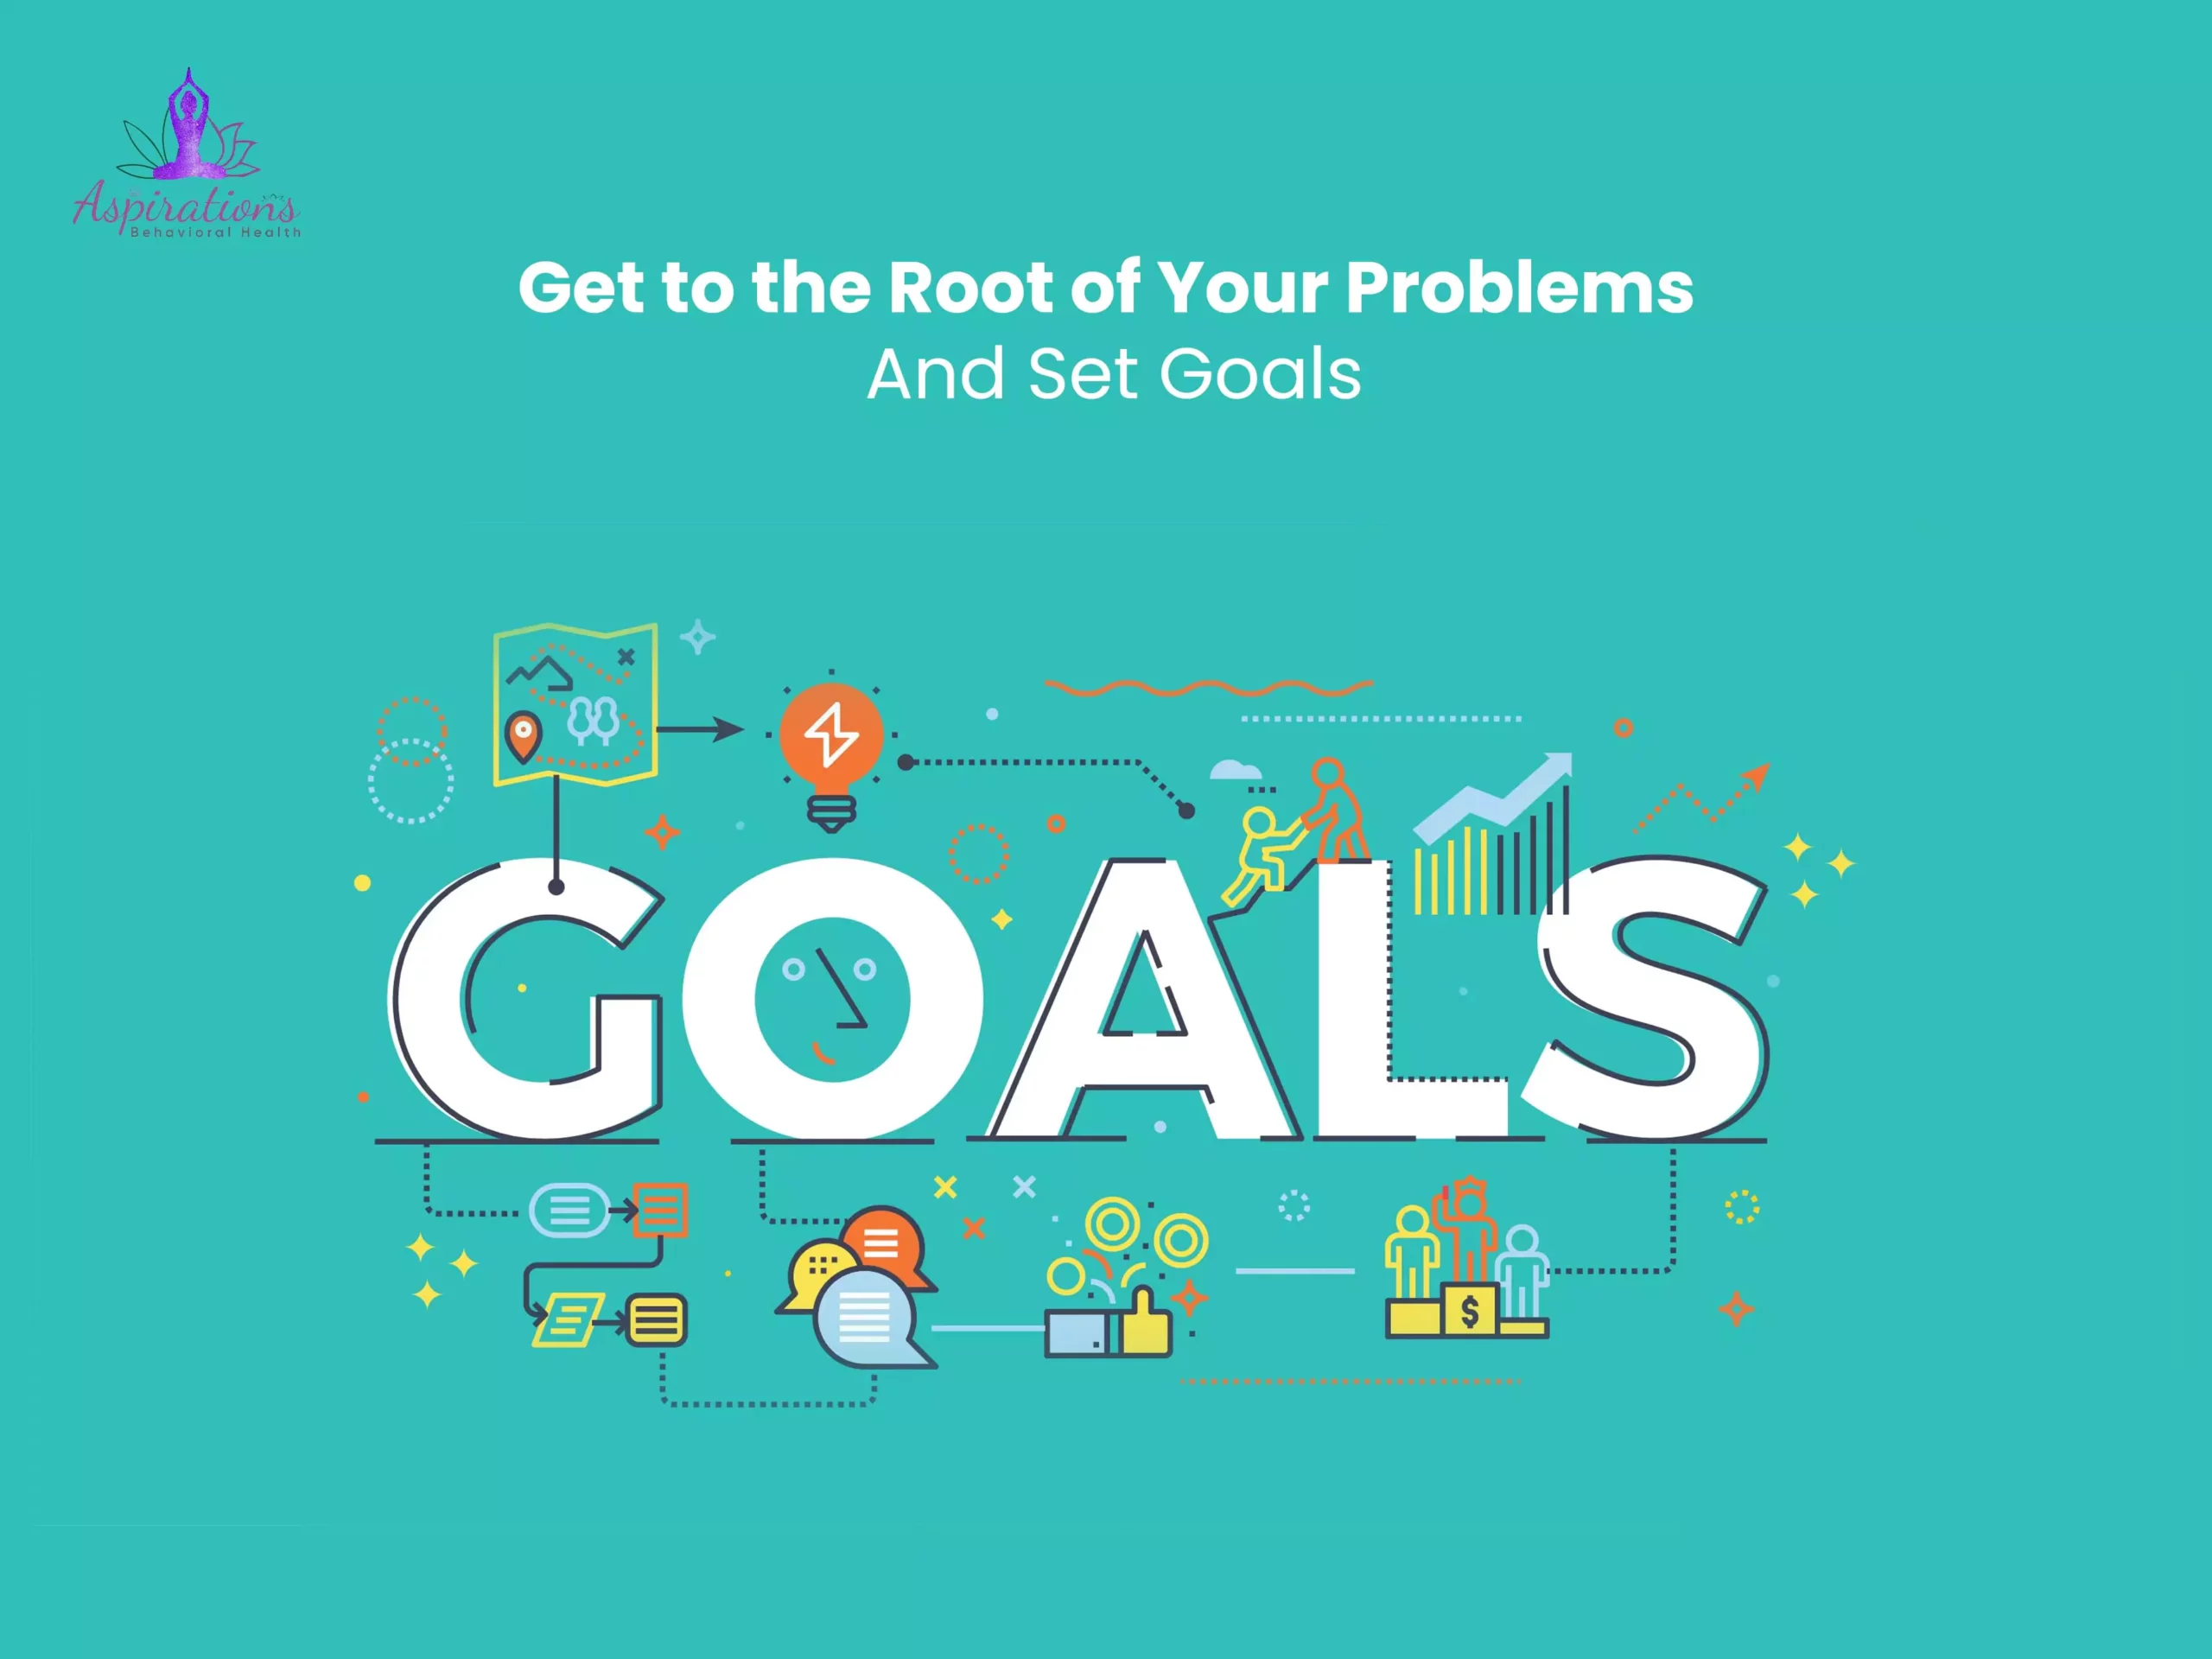 Get to the Root of Your Problems and Set Goals